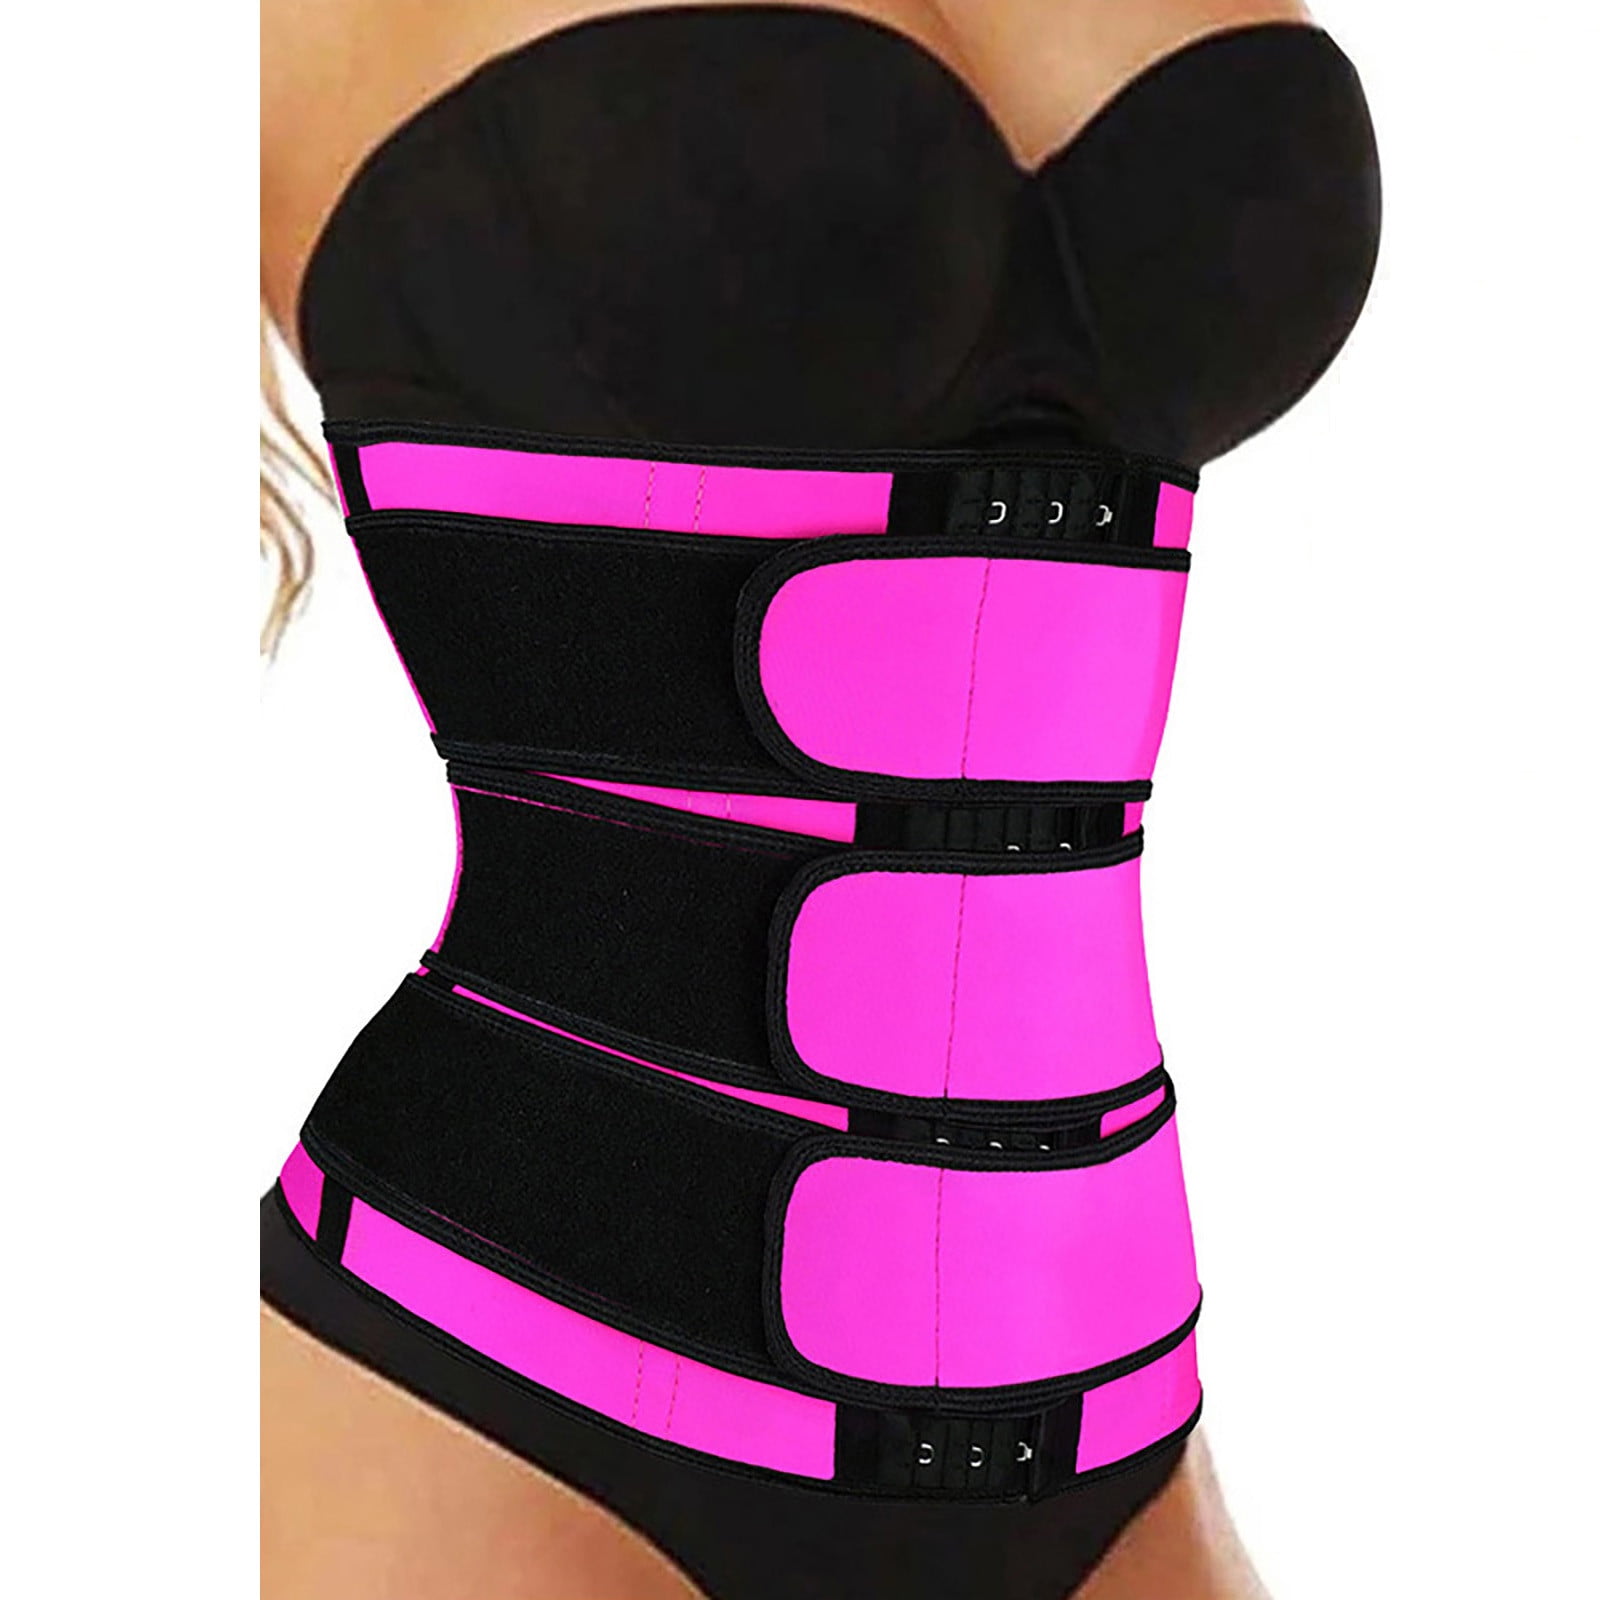 Enamor 2XL Pink Waist Shaper Price Starting From Rs 469